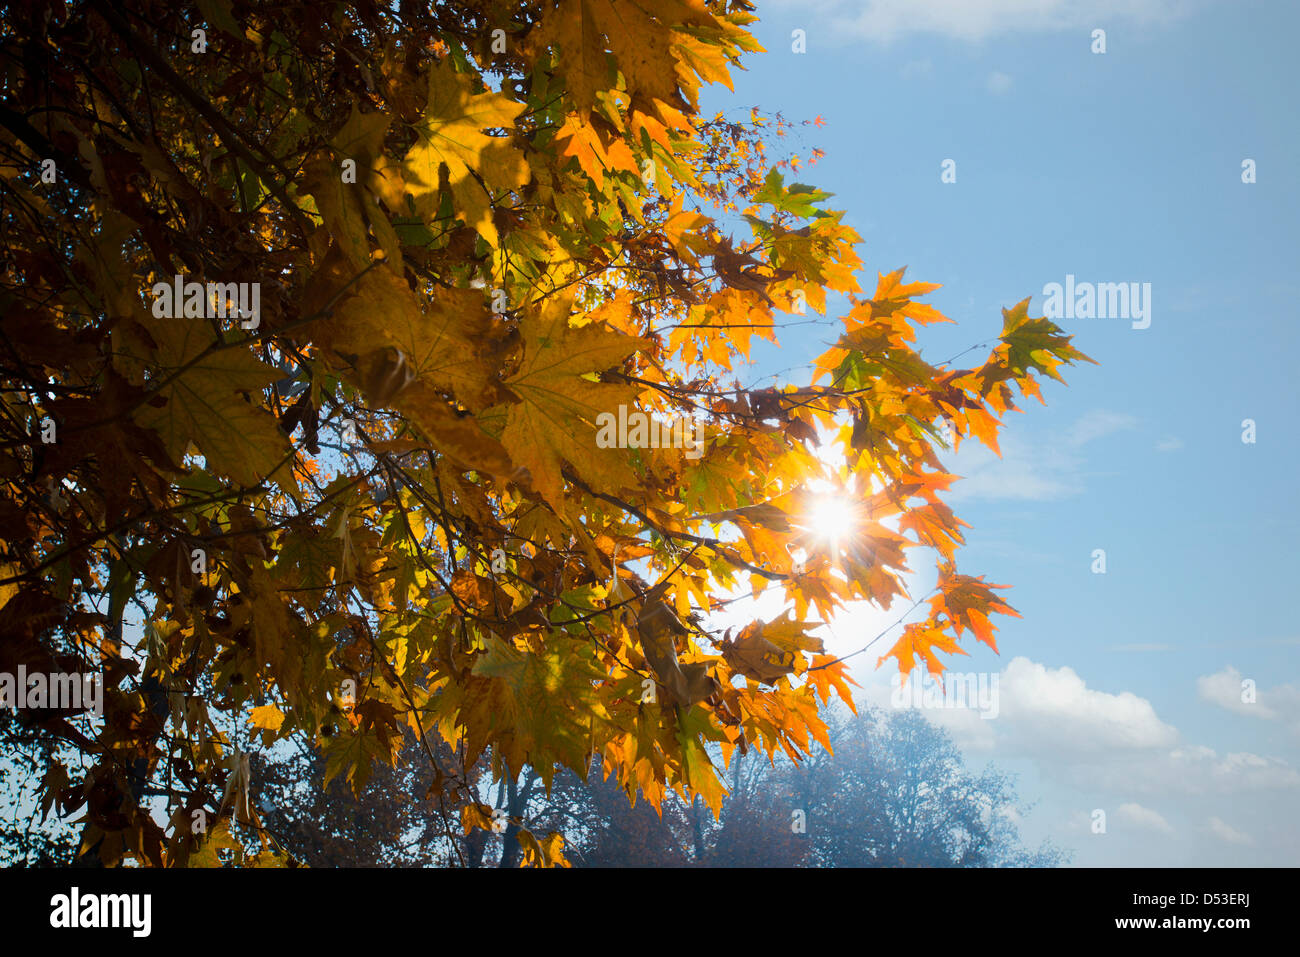 Low angle view of maple leaves on a tree, Chinar Bagh, Srinagar, Jammu And Kashmir, India Stock Photo